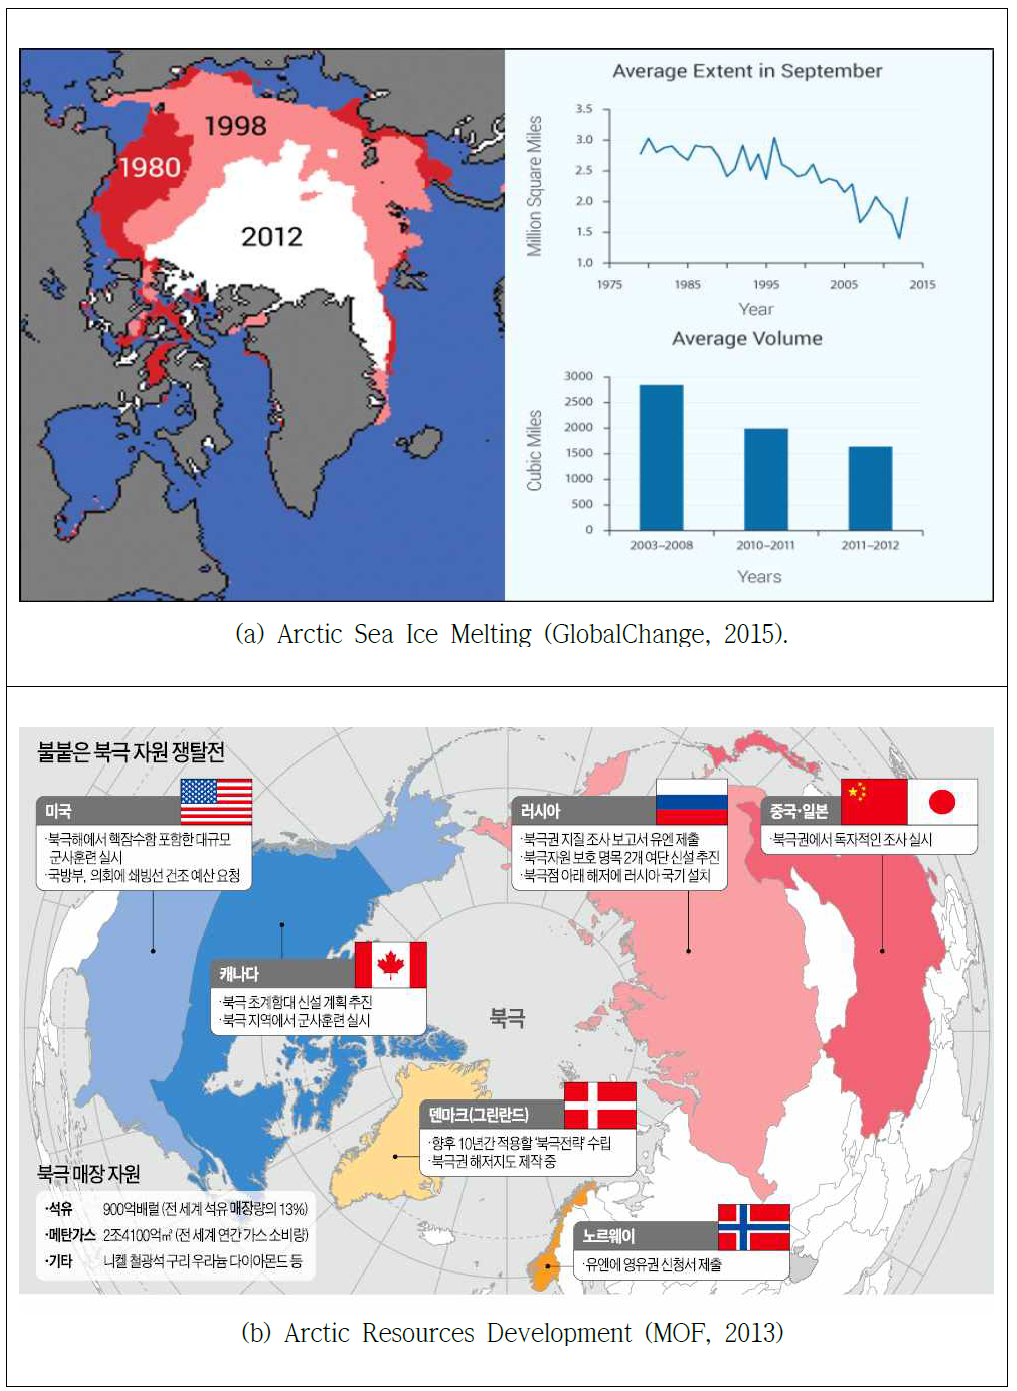 Analysis of the Arctic sea ice melting and Arctic resources development.